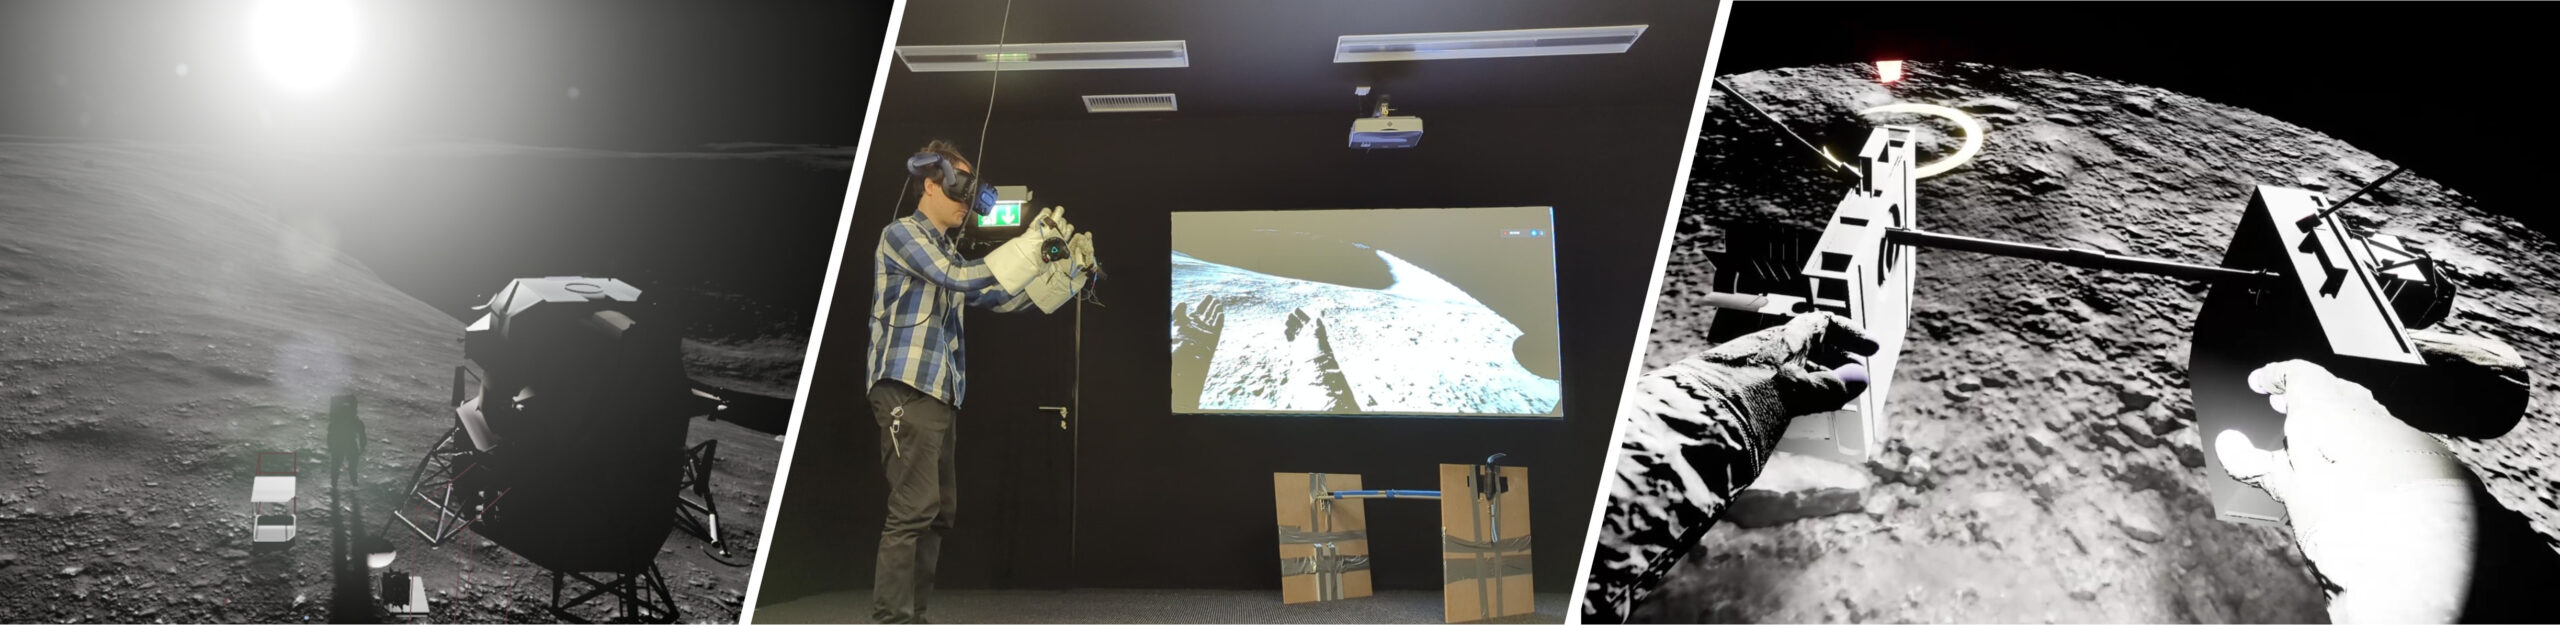 Touching the Moon: Leveraging Passive Haptics, Embodiment and Presence for Operational Assessments in Virtual Reality